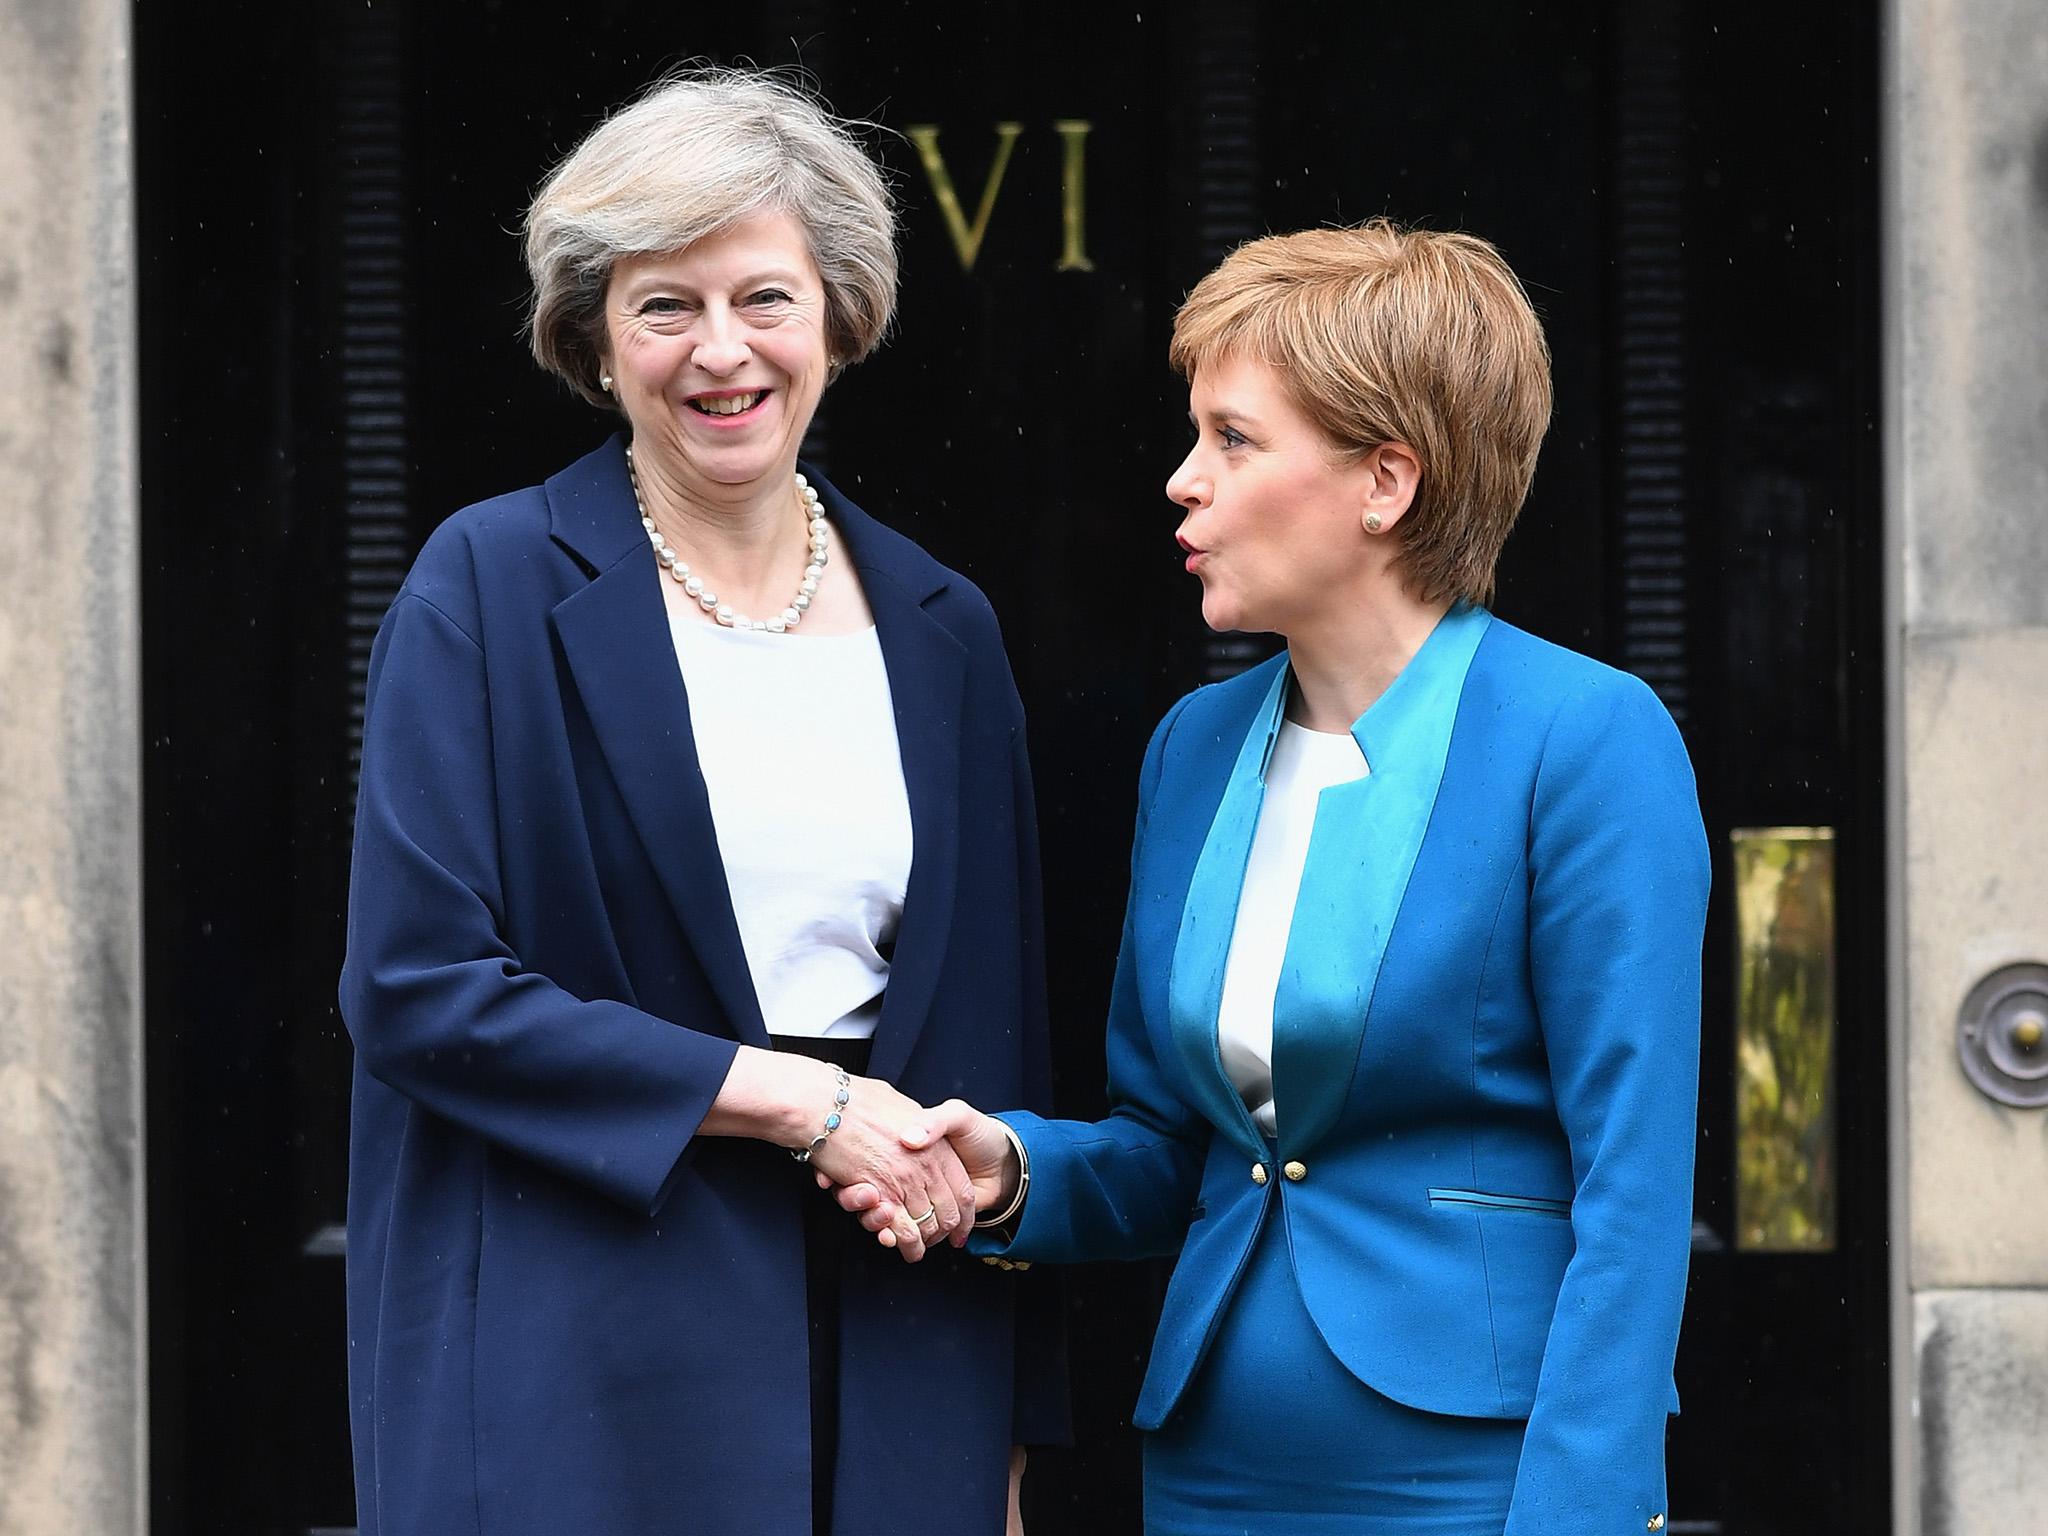 The Prime Minister and the Scottish First Minister will hold talks for the first time since the latter called for a new vote on Scotland’s independence